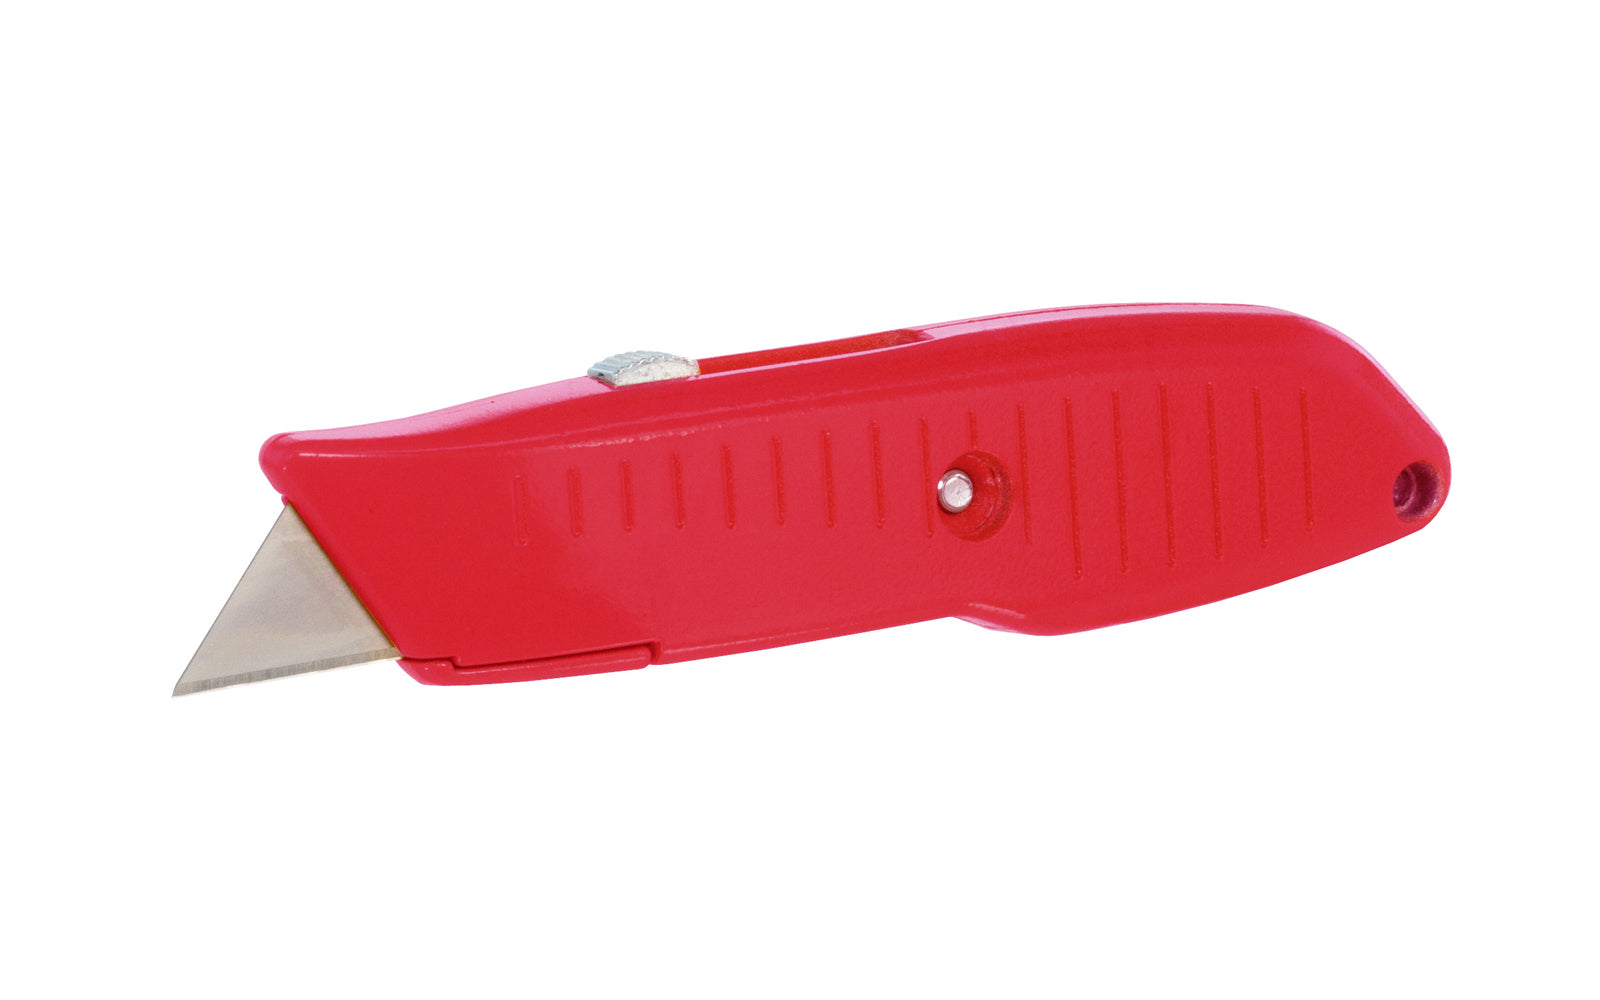 Lutz #82 Retractable Utility Knife in a red color. Die cast body from zinc for strength & durability. Etched ribs for a good grip. Metal utility knife with built zinc retractor for smooth operation in three cutting positions. Blade storage inside knife. Takes heavy duty utility knife blades. 052427382054. Model 82